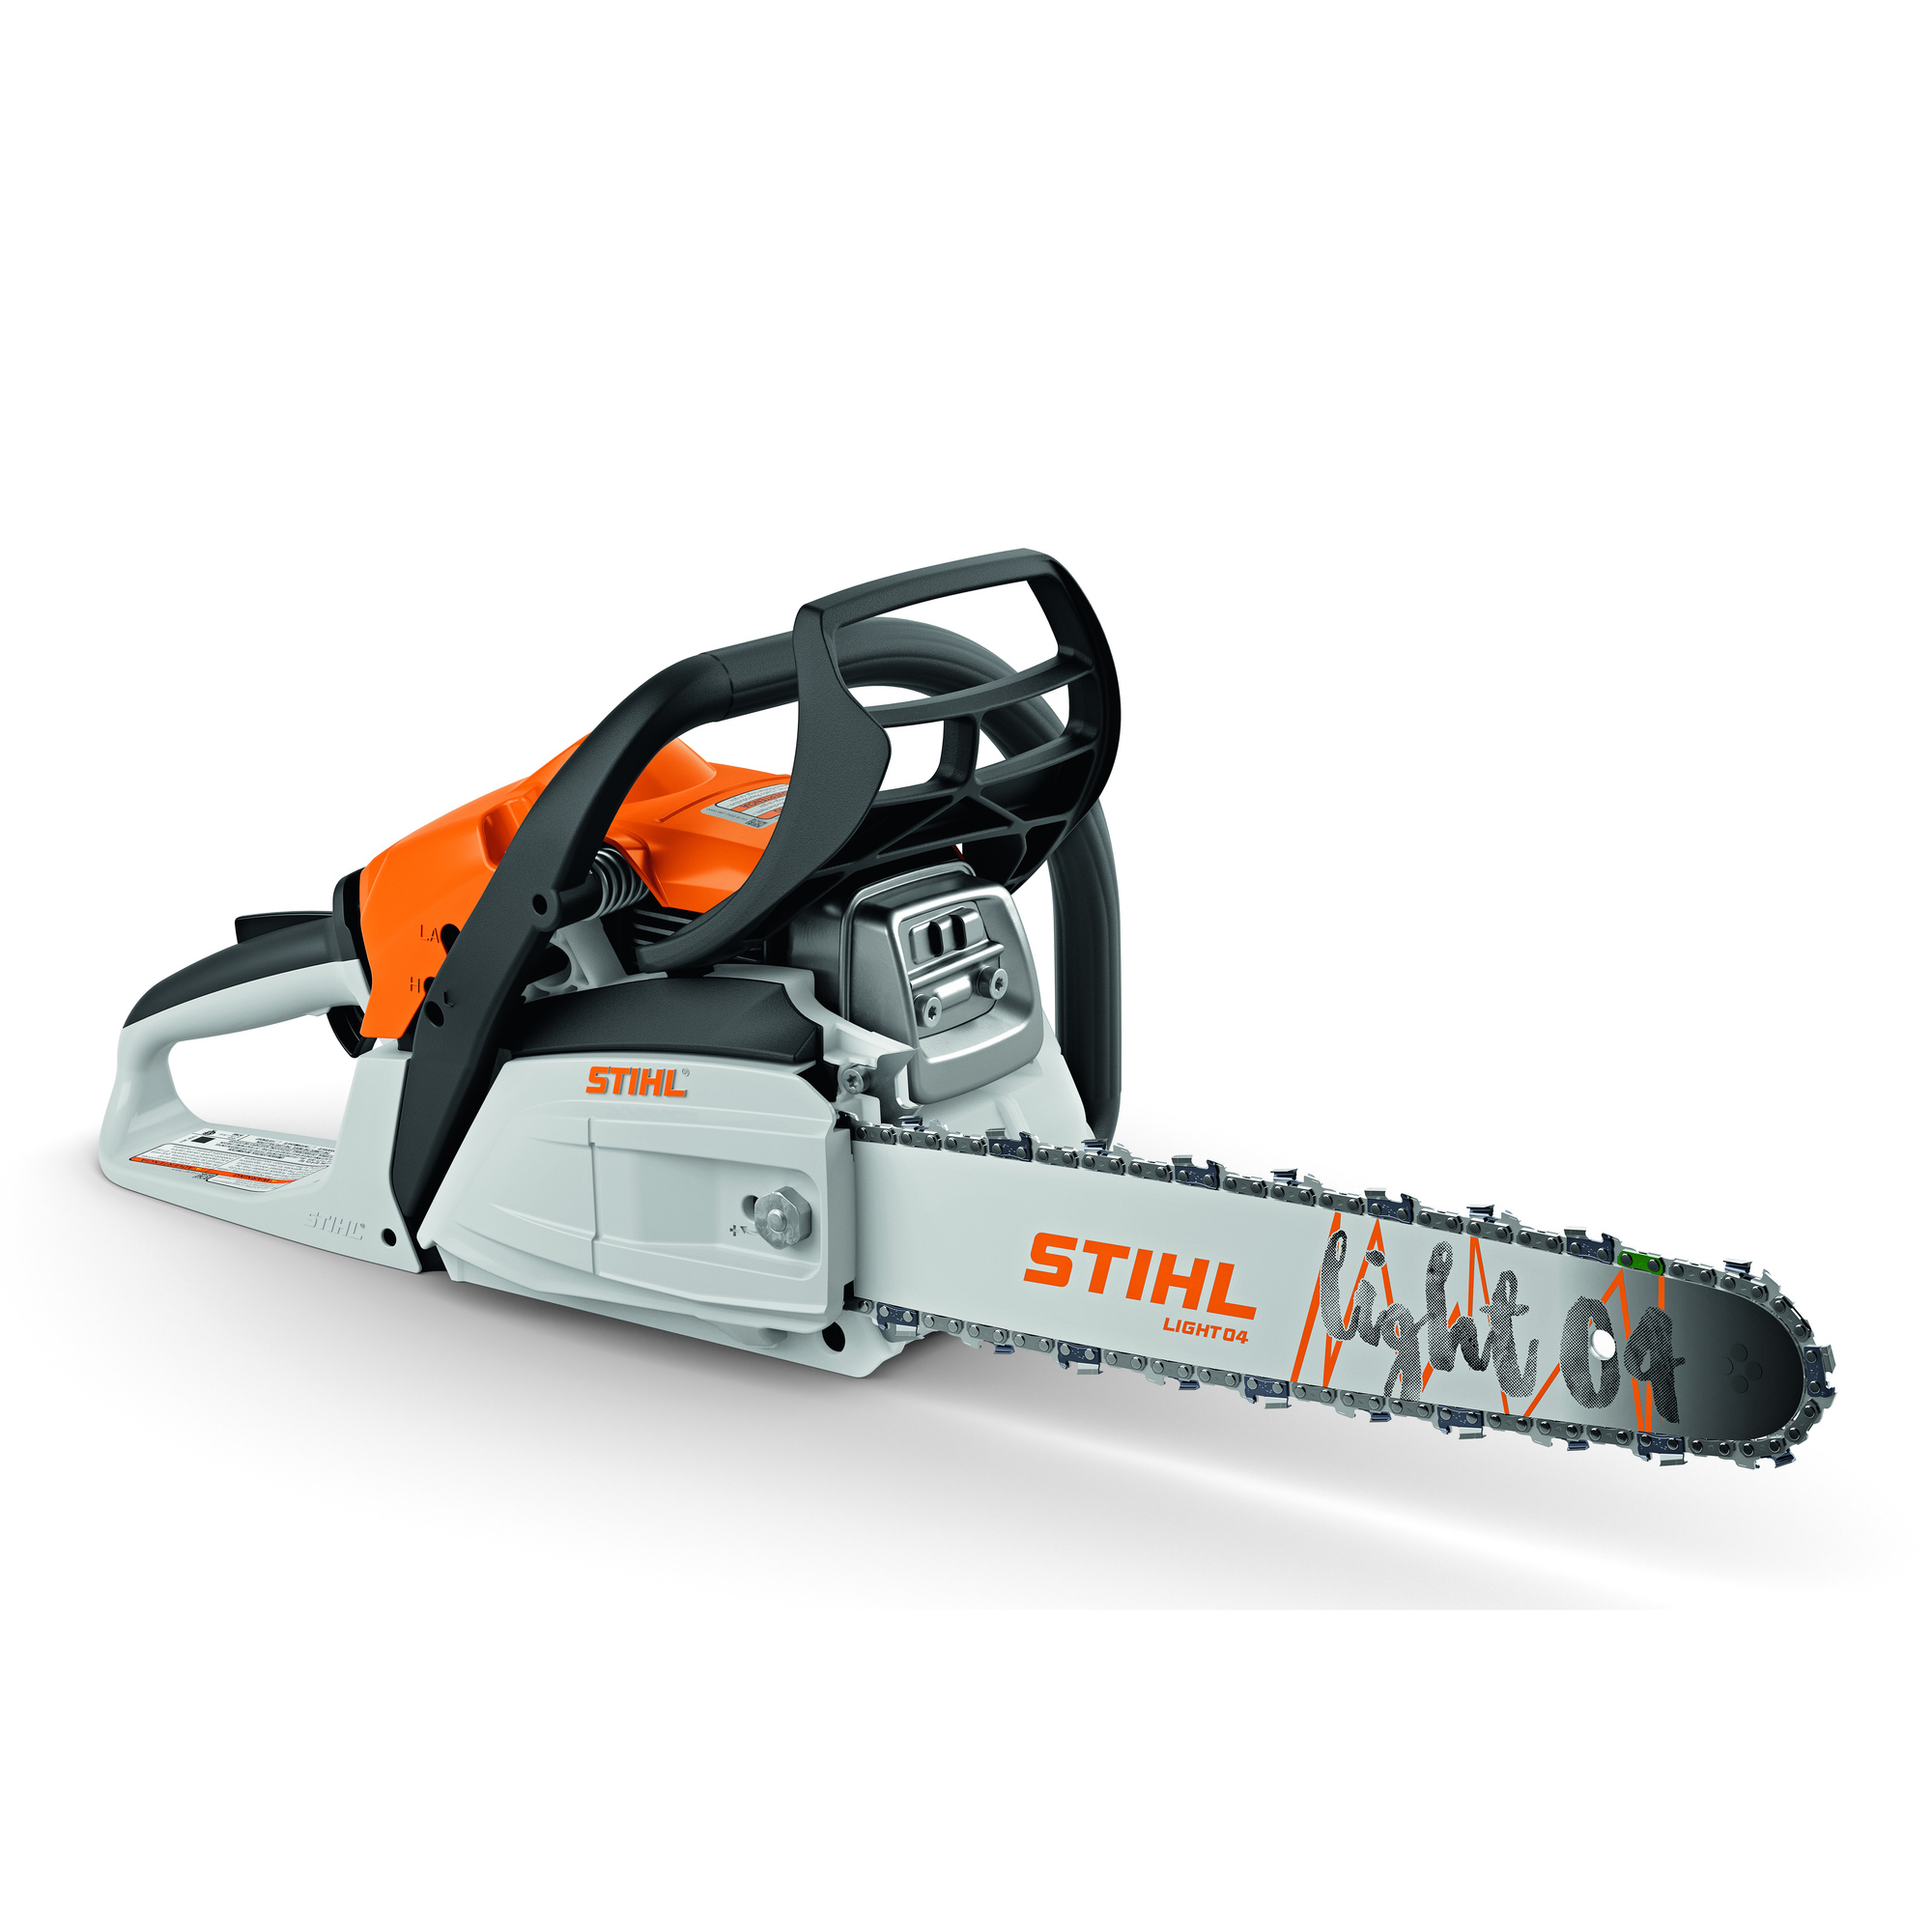 Stihl, Gasoline Powered Chain Saw, Bar Length 16 in, Engine Displacement 35.8 cc, Model MS 182